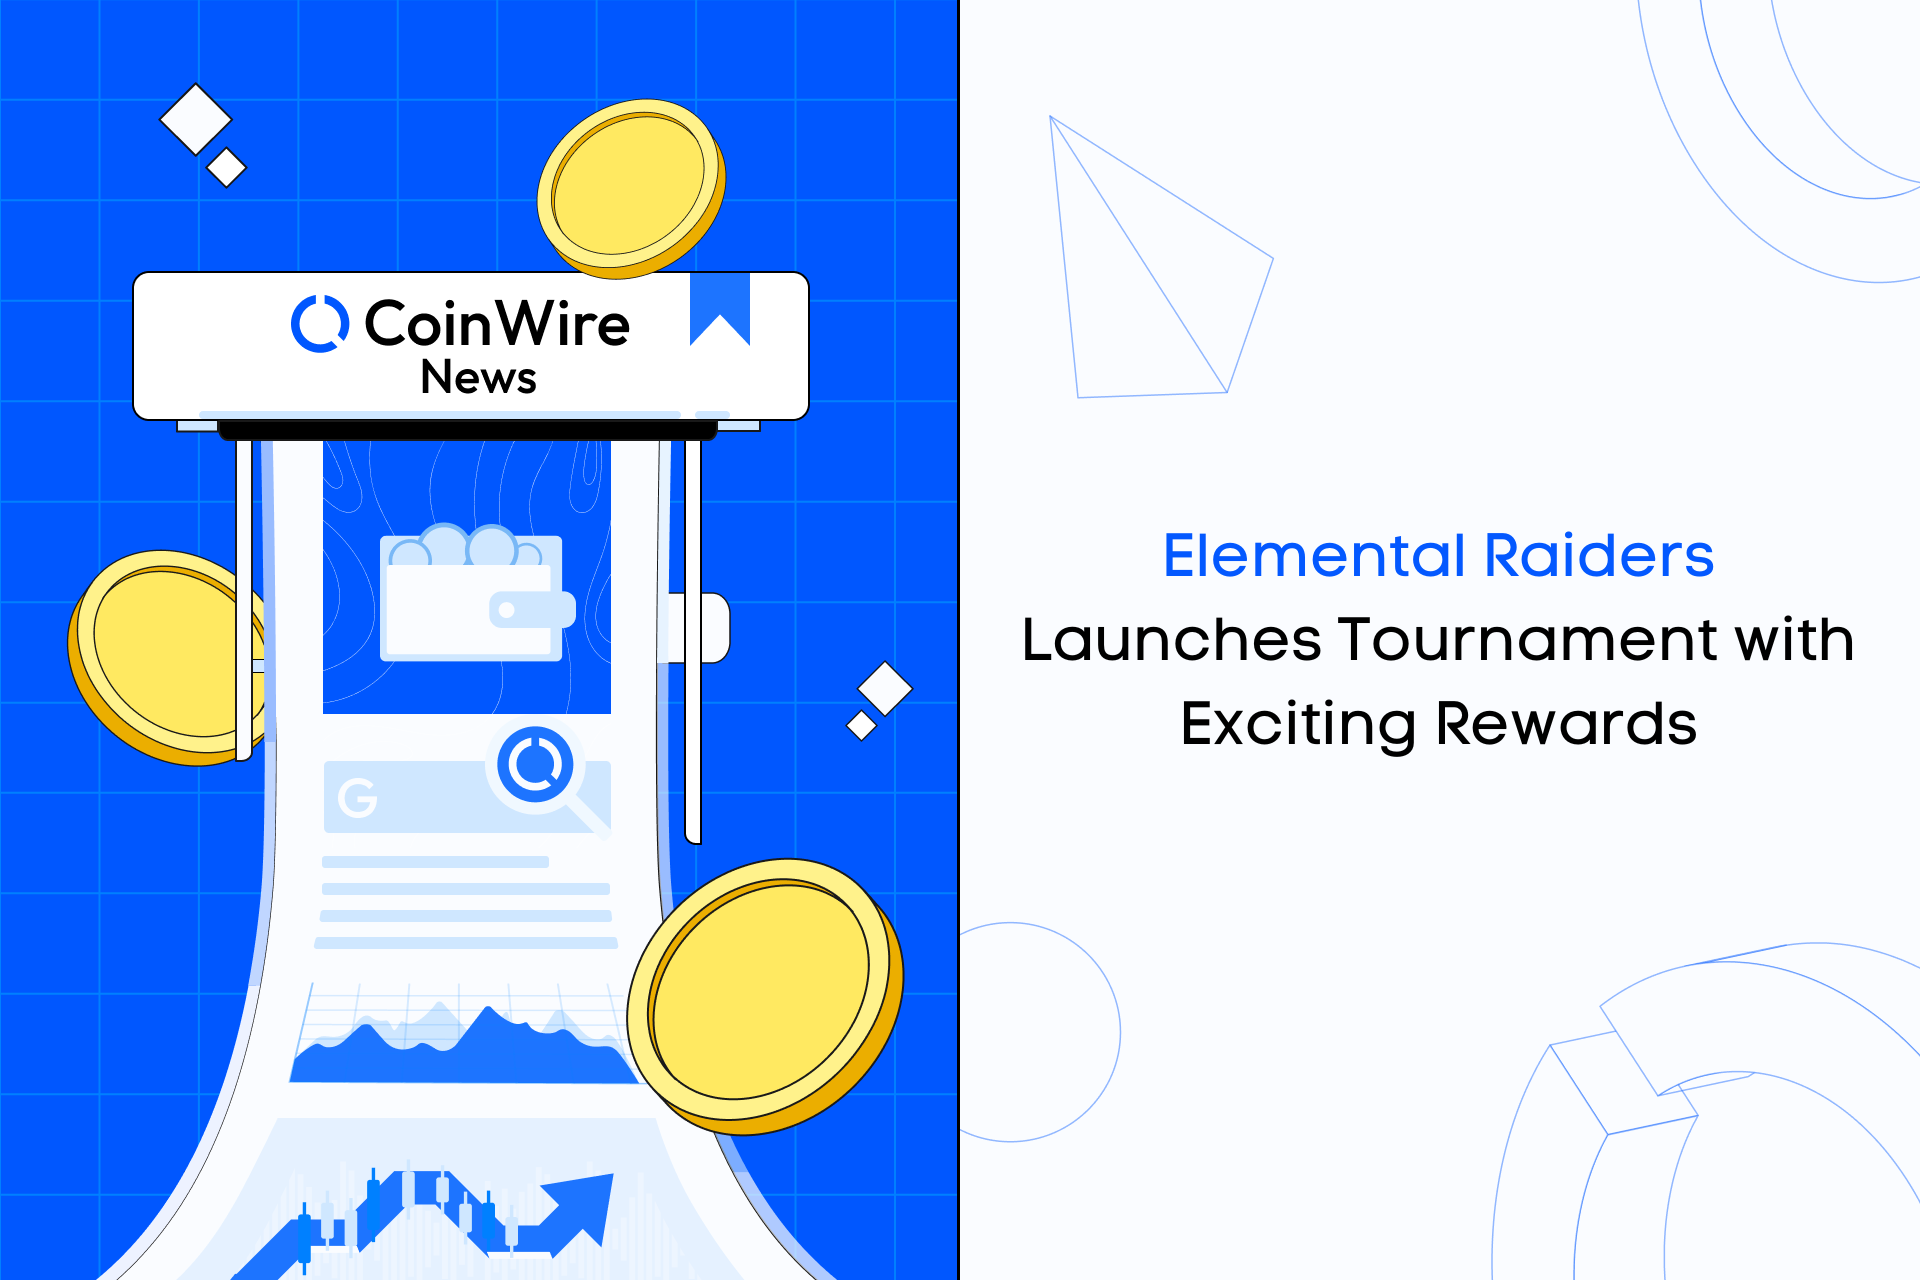 Elemental Raiders Launches Tournament With Exciting Rewards